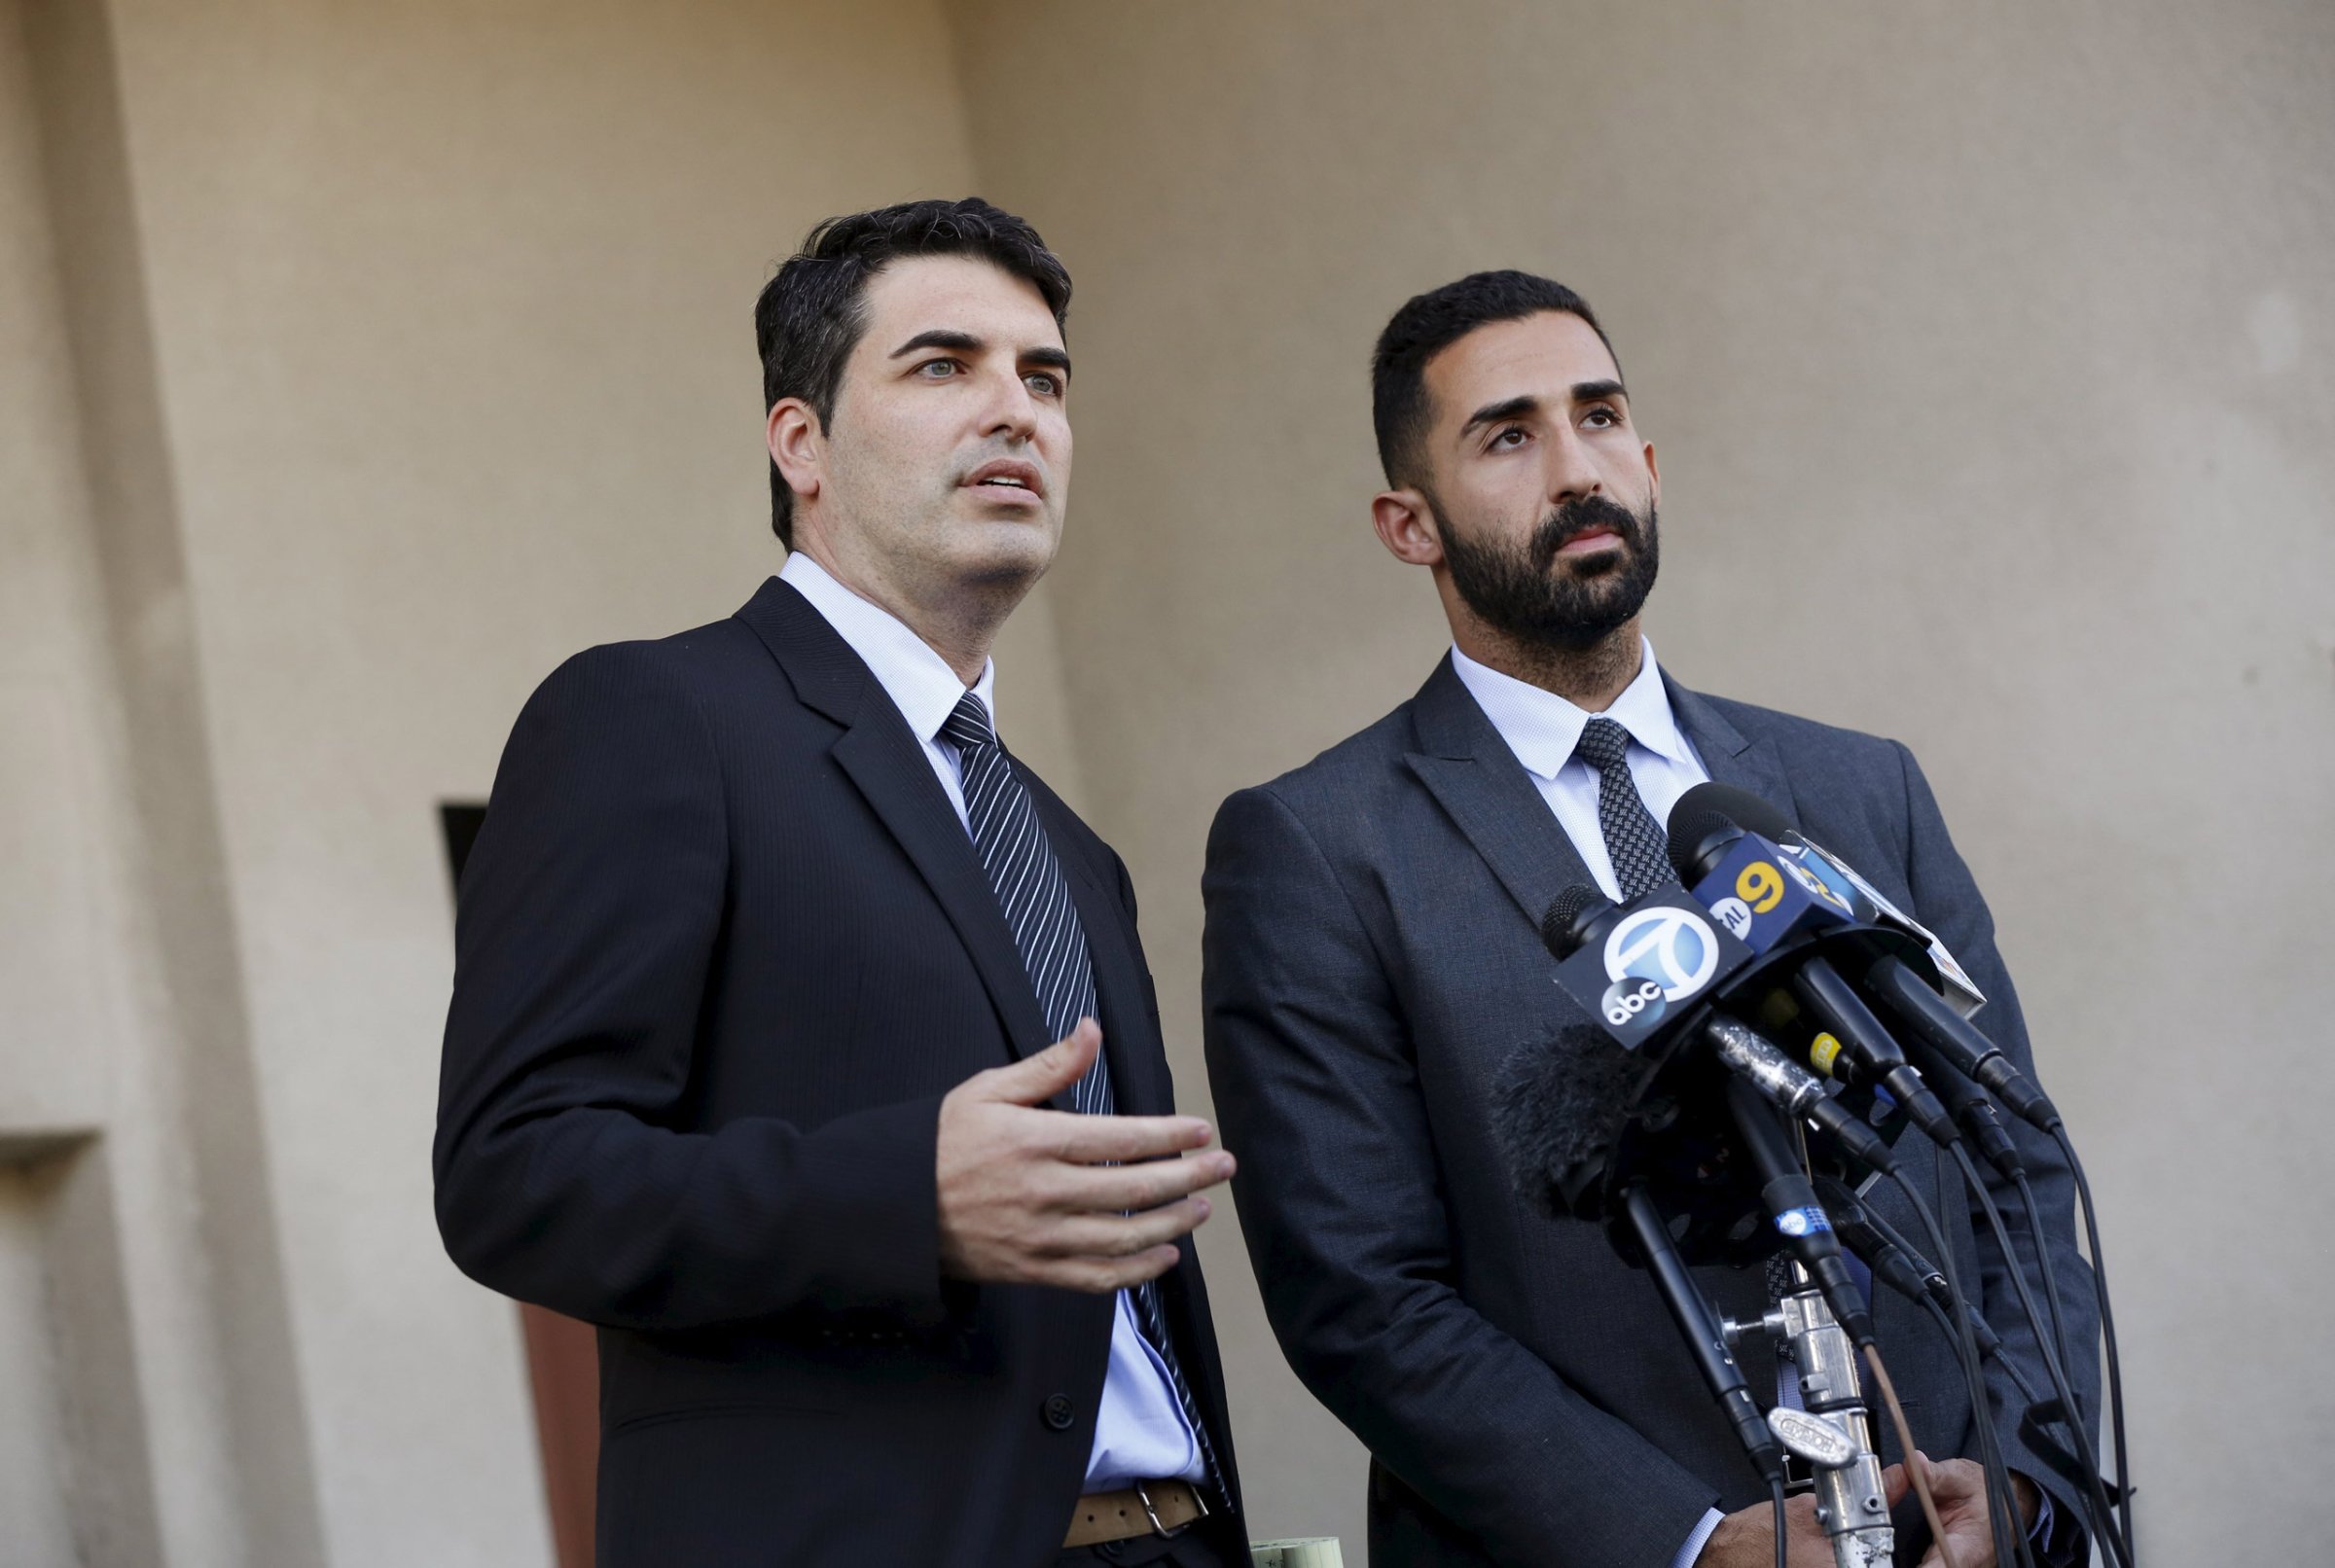 Lawyers representing the Farook family, David S. Chesley and Mohammad Abuershaid (R), speak during a news conference in Los Angeles, California December 4, 2015. The FBI is investigating this week's massacre of 14 people by a married couple in California as an "act of terrorism," officials said on Friday, noting that the female shooter had pledged allegiance to a leader of the militant group Islamic State. REUTERS/Patrick T. Fallon TPX IMAGES OF THE DAY